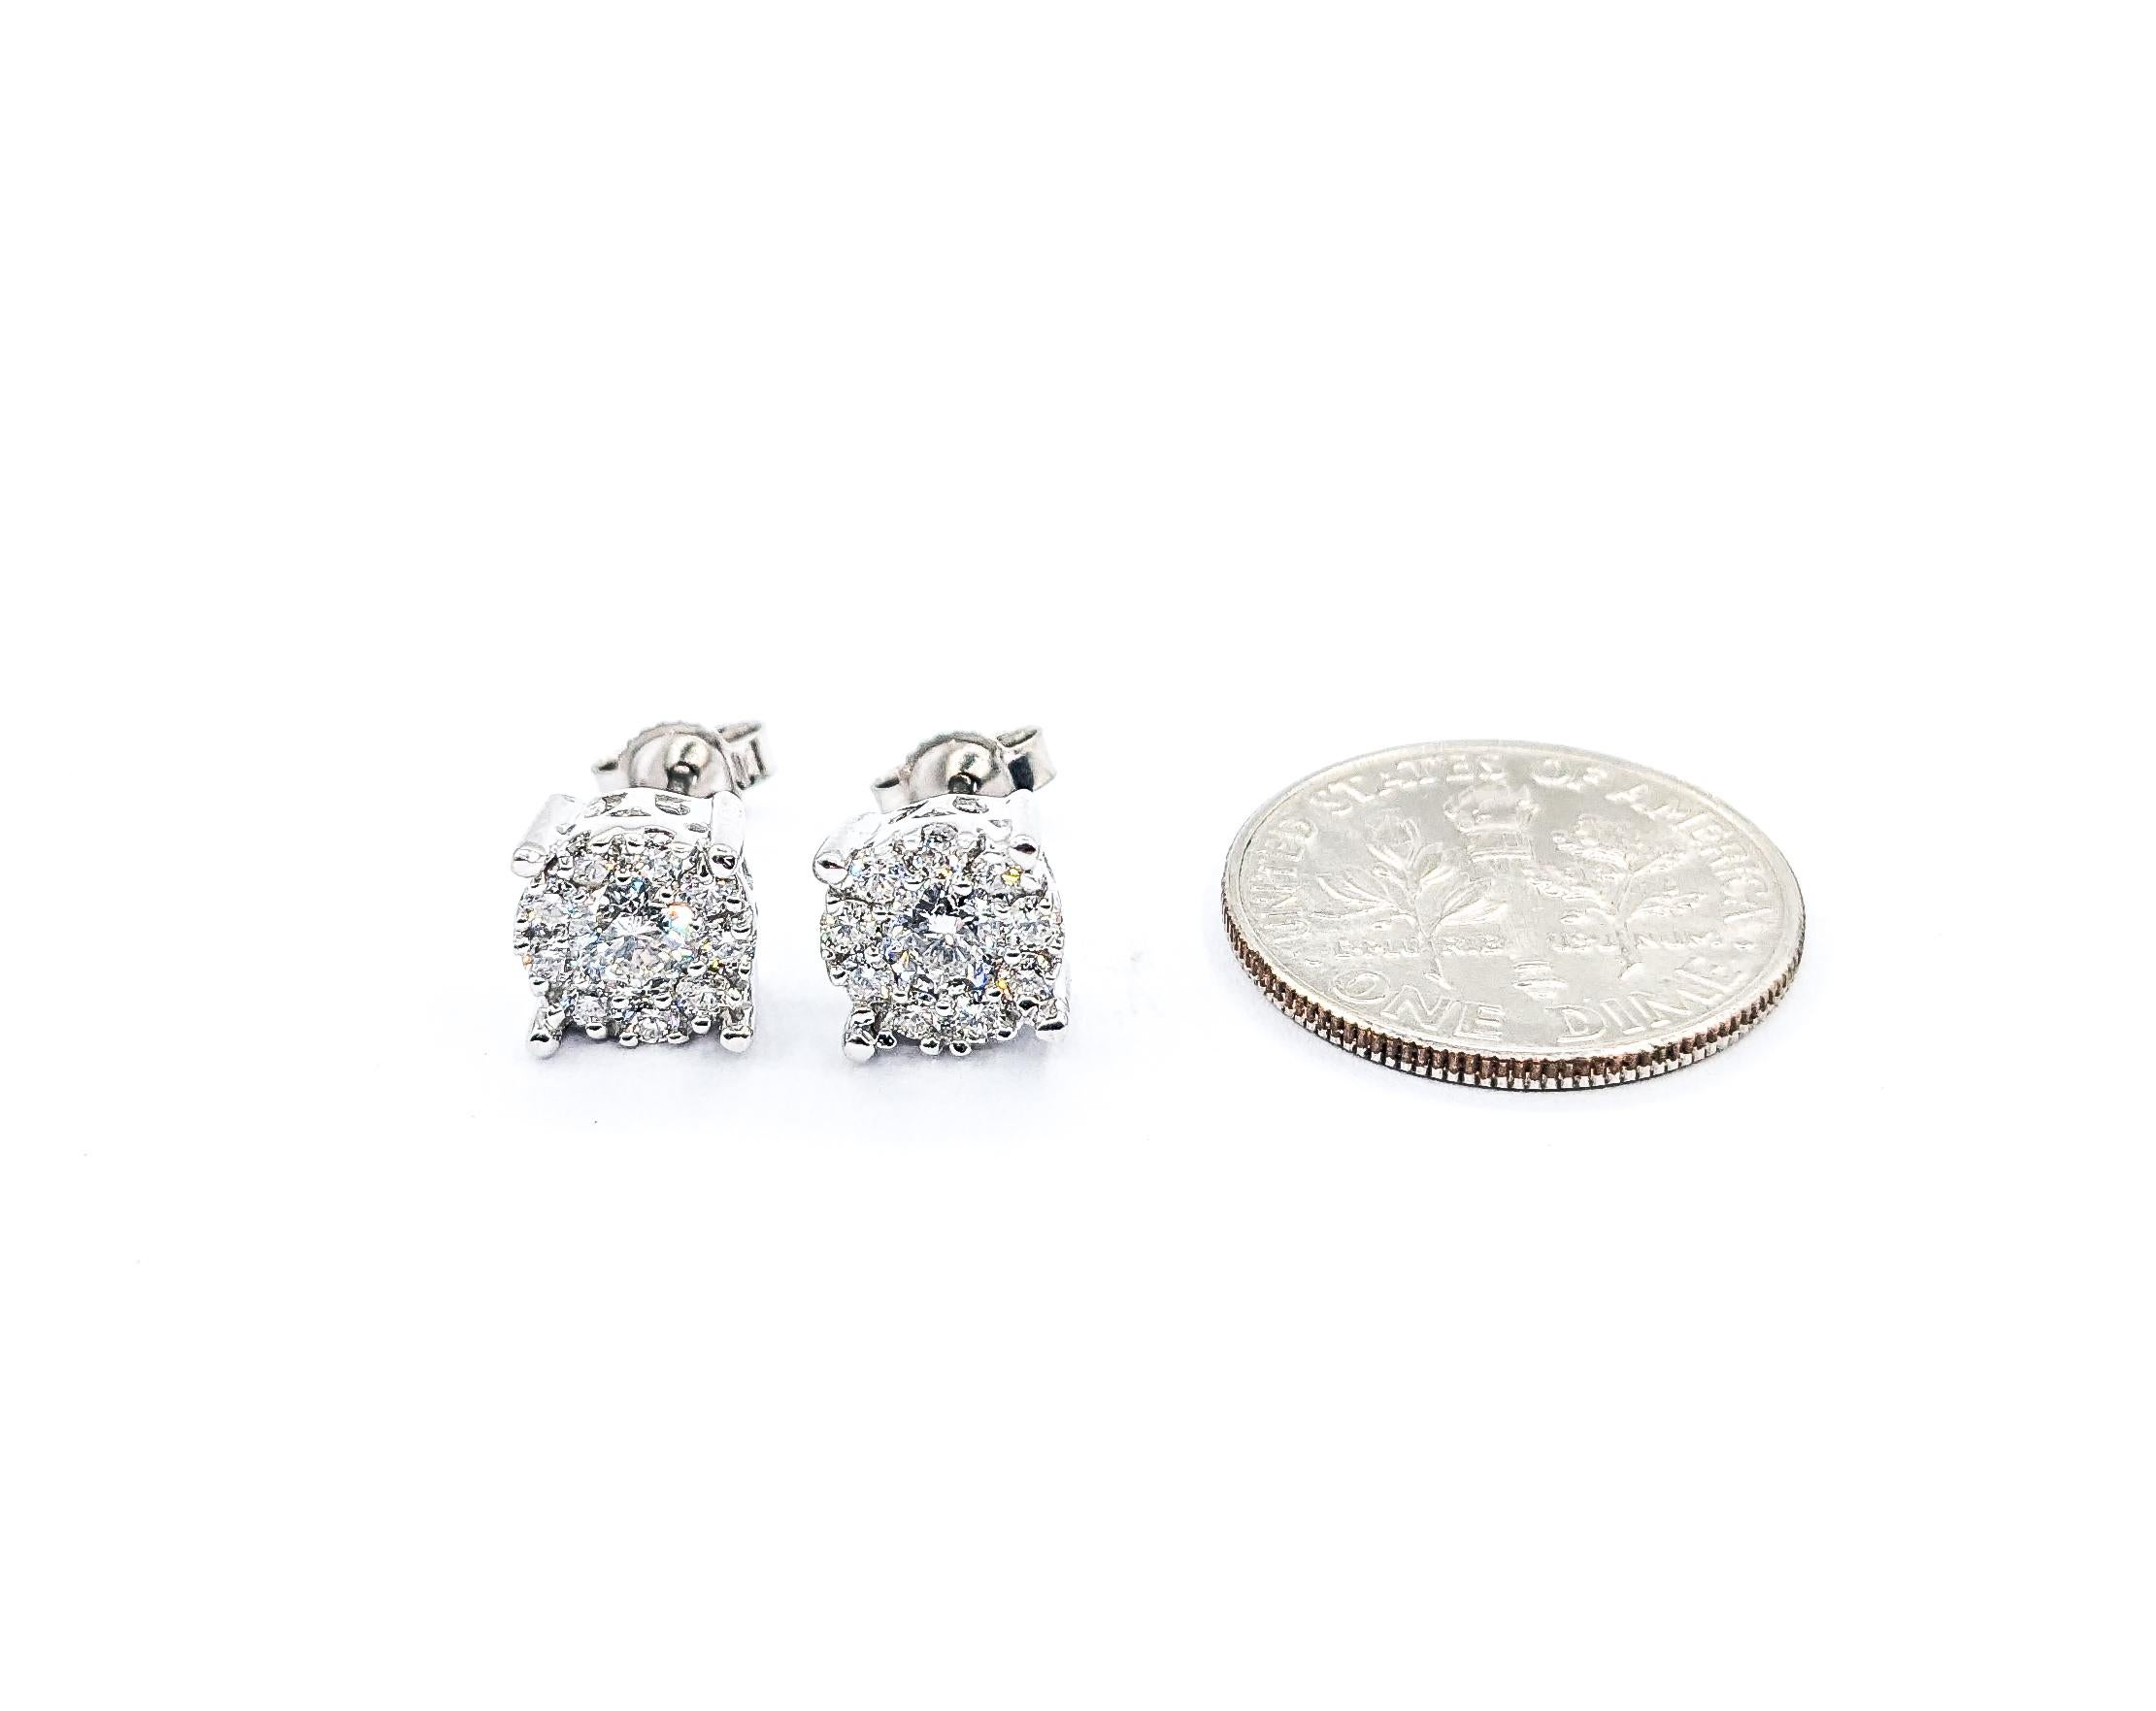 .73ctw Diamond Cluster Stud Earrings In White Gold

Introducing these stunning natural diamond cluster stud Earrings, meticulously crafted in 14k White Gold. These cocktail stud earrings are adorned with .73ctw of diamonds that boast SI clarity and